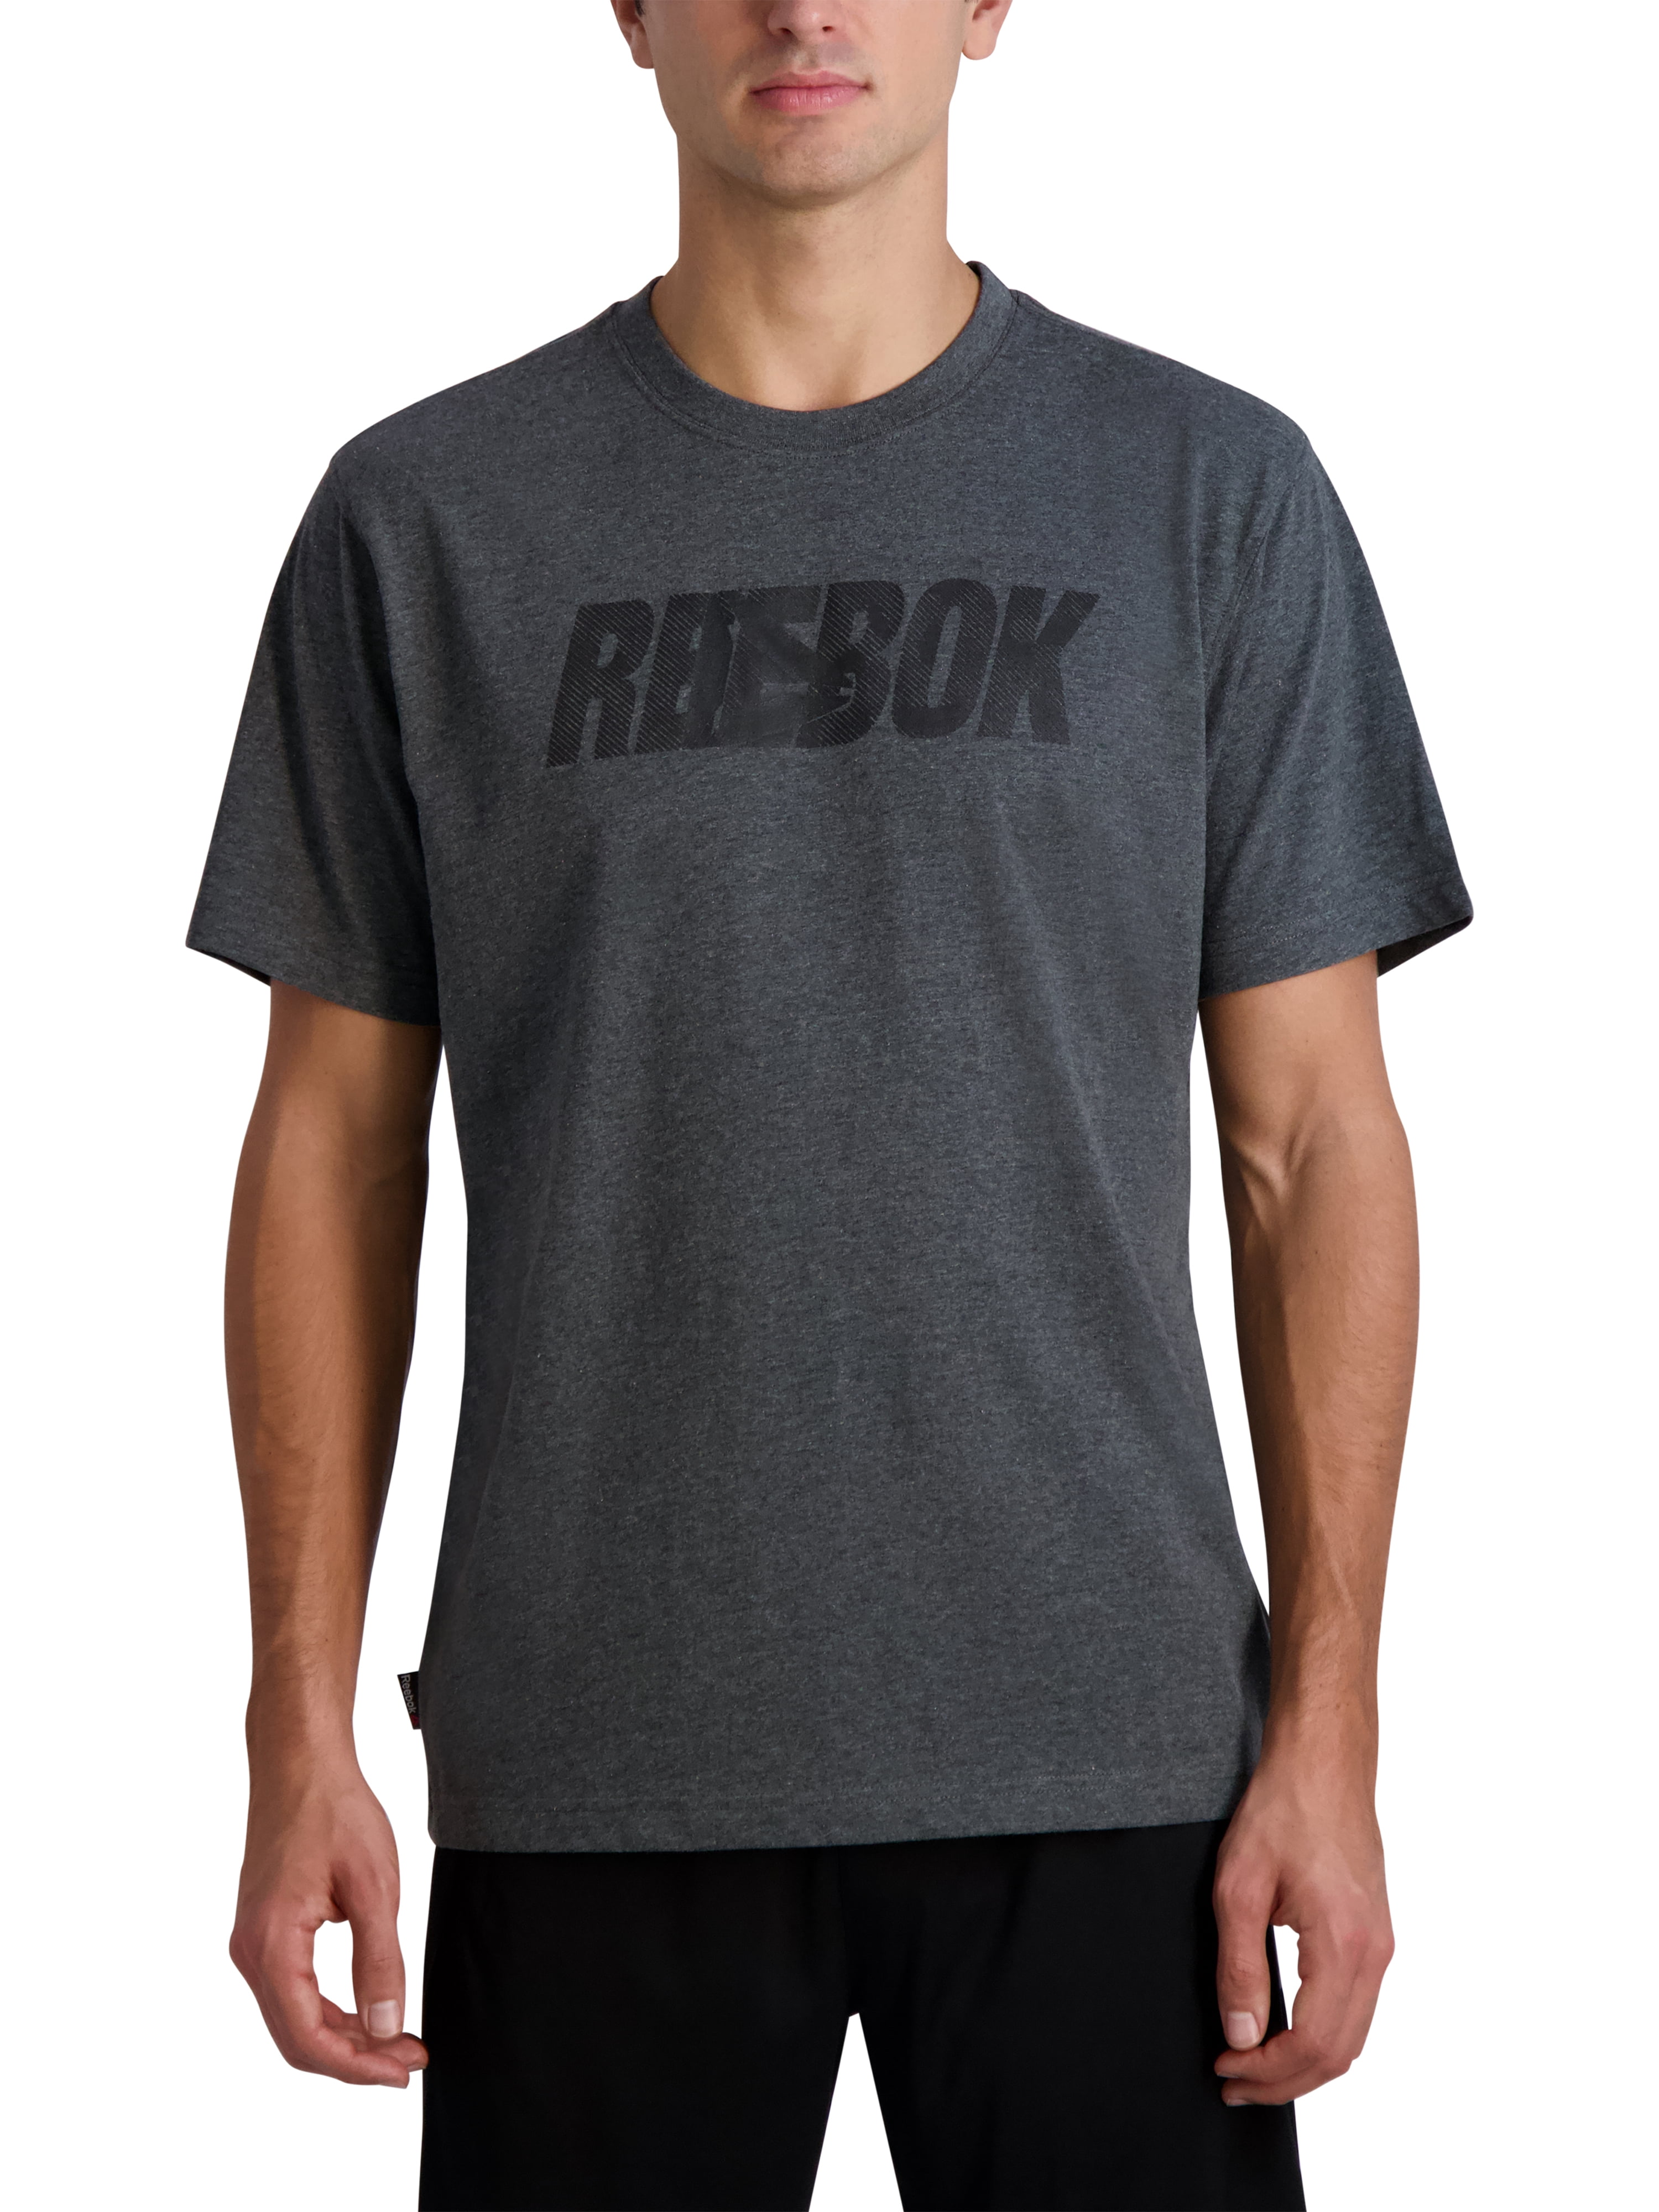 Reebok Men's and Big Men's Athletic Graphic Tees, up to Size 3XL ...